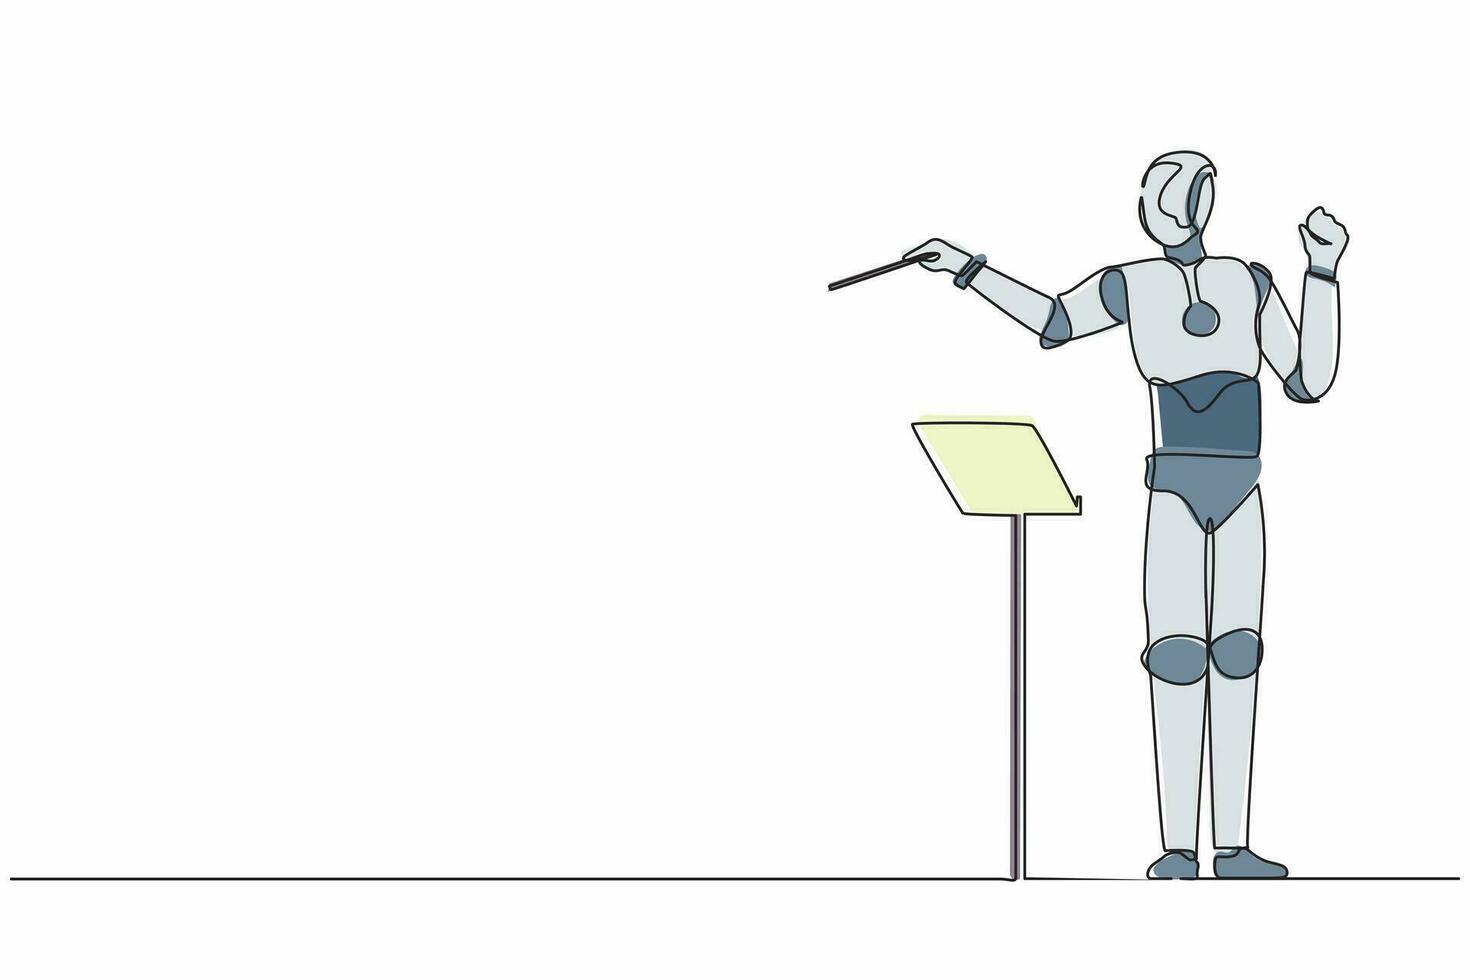 Single continuous line drawing expressive robot conductor directs music orchestra. Modern robotic artificial intelligence. Electronic technology industry. One line graphic design vector illustration